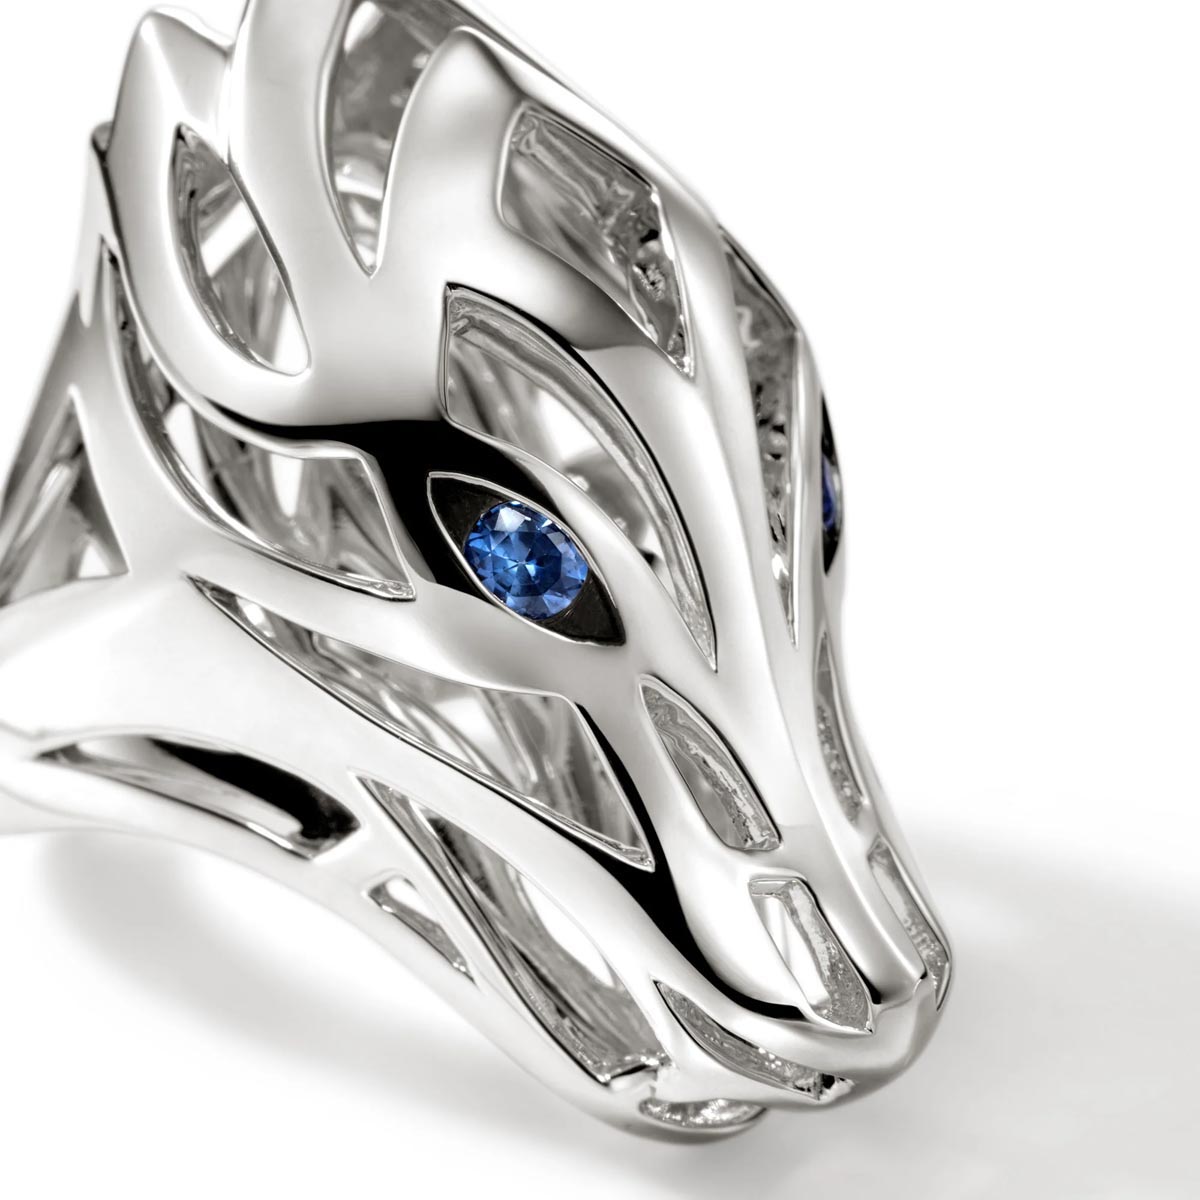 John Hardy Legends Naga Saddle Ring with Sapphires in Sterling Silver